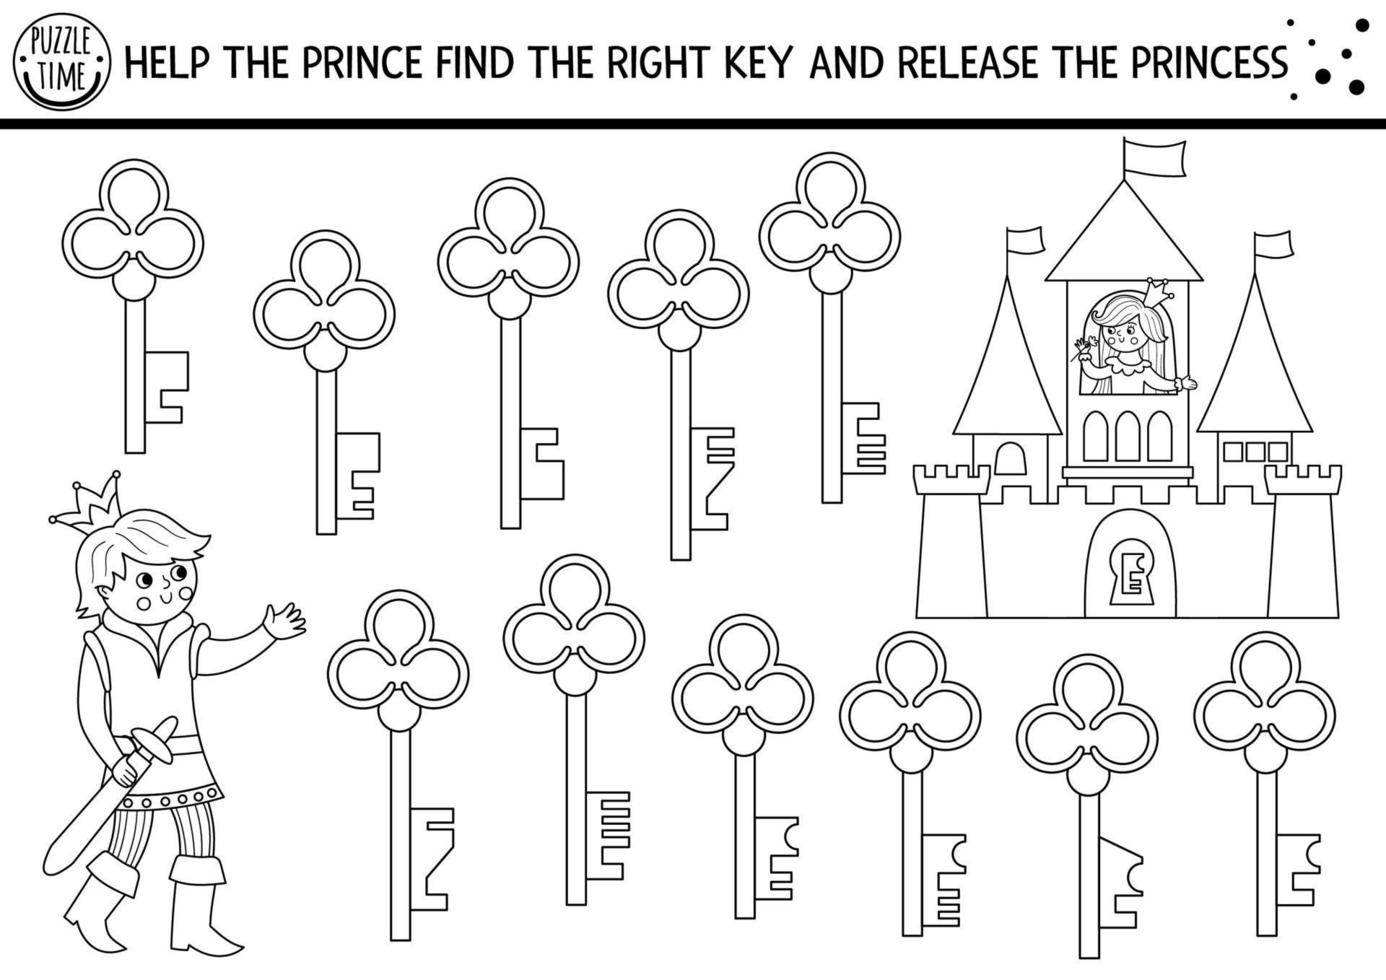 Find the right key to release princess. Fairytale black and white matching activity for children. Magic kingdom line quiz worksheet or coloring page. Simple printable game with castle, prince vector